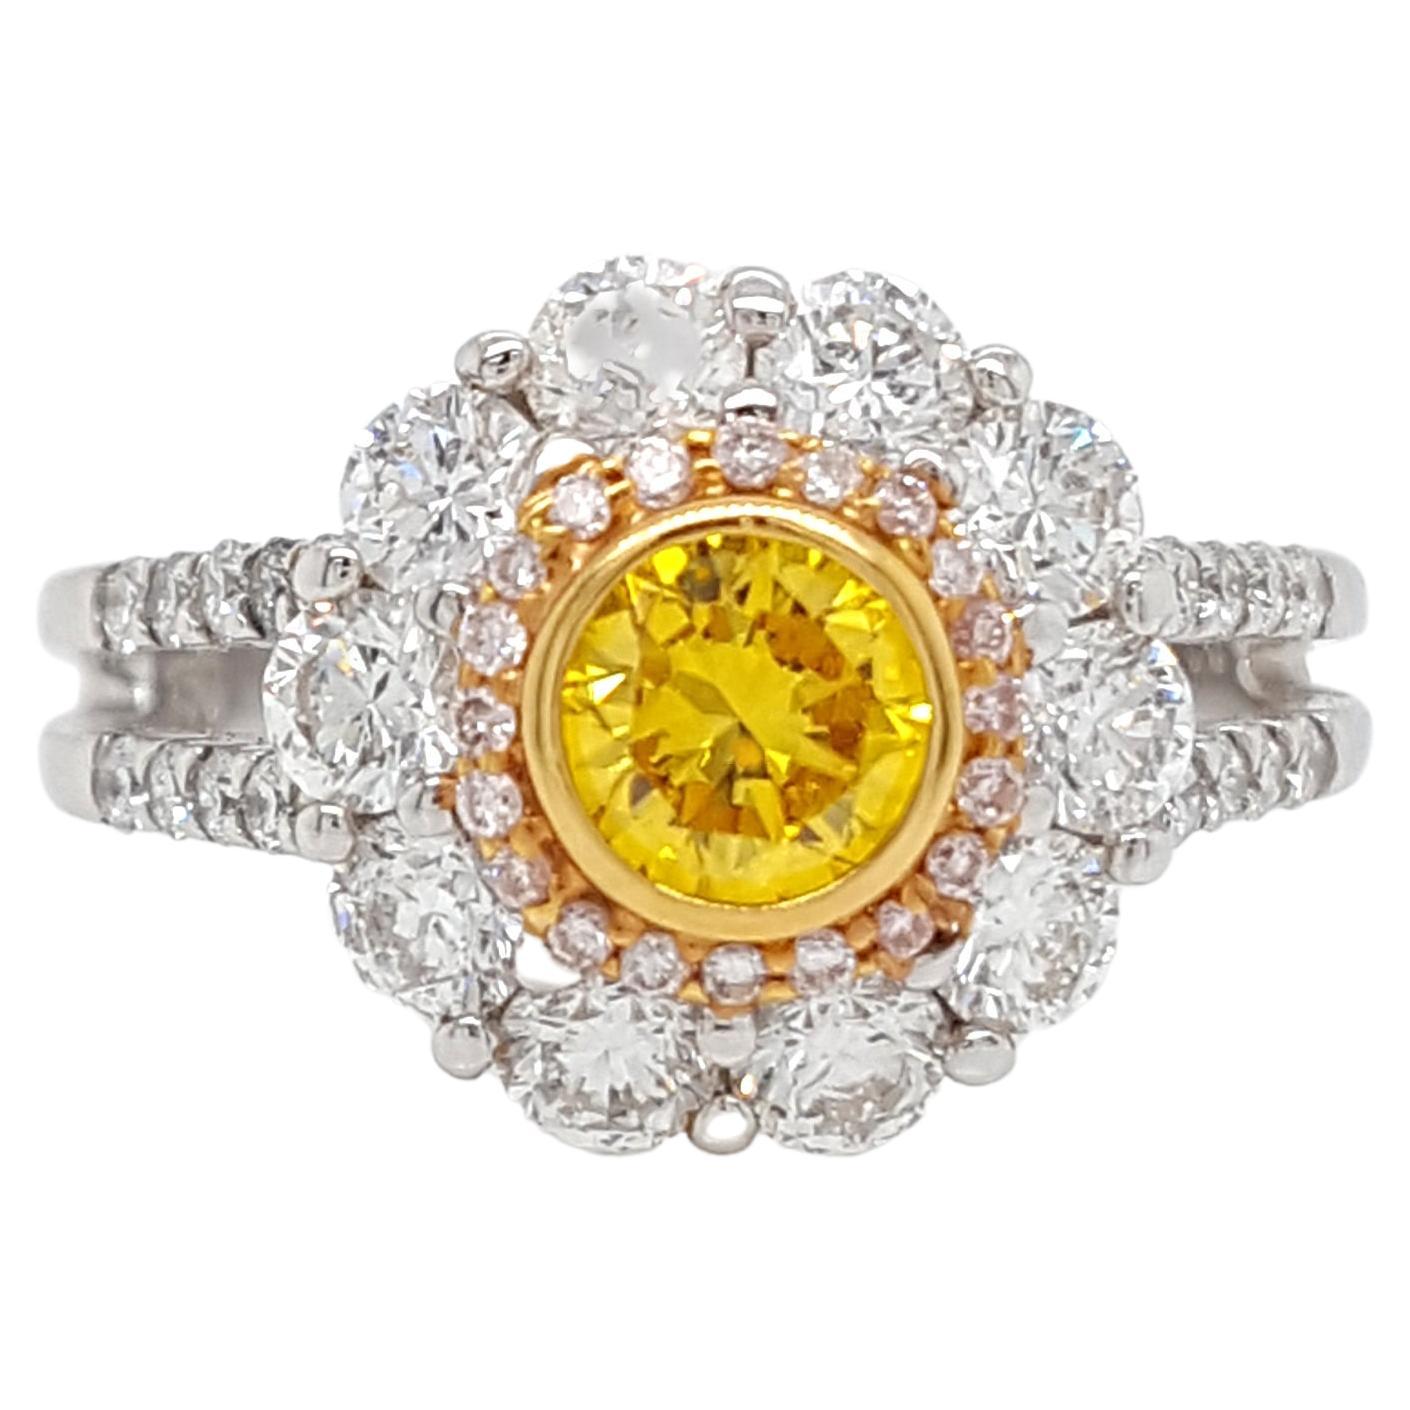 0.44 Carat Fancy Vivid Yellow Diamond Engagement Cocktail Ring, GIA Certificate  For Sale